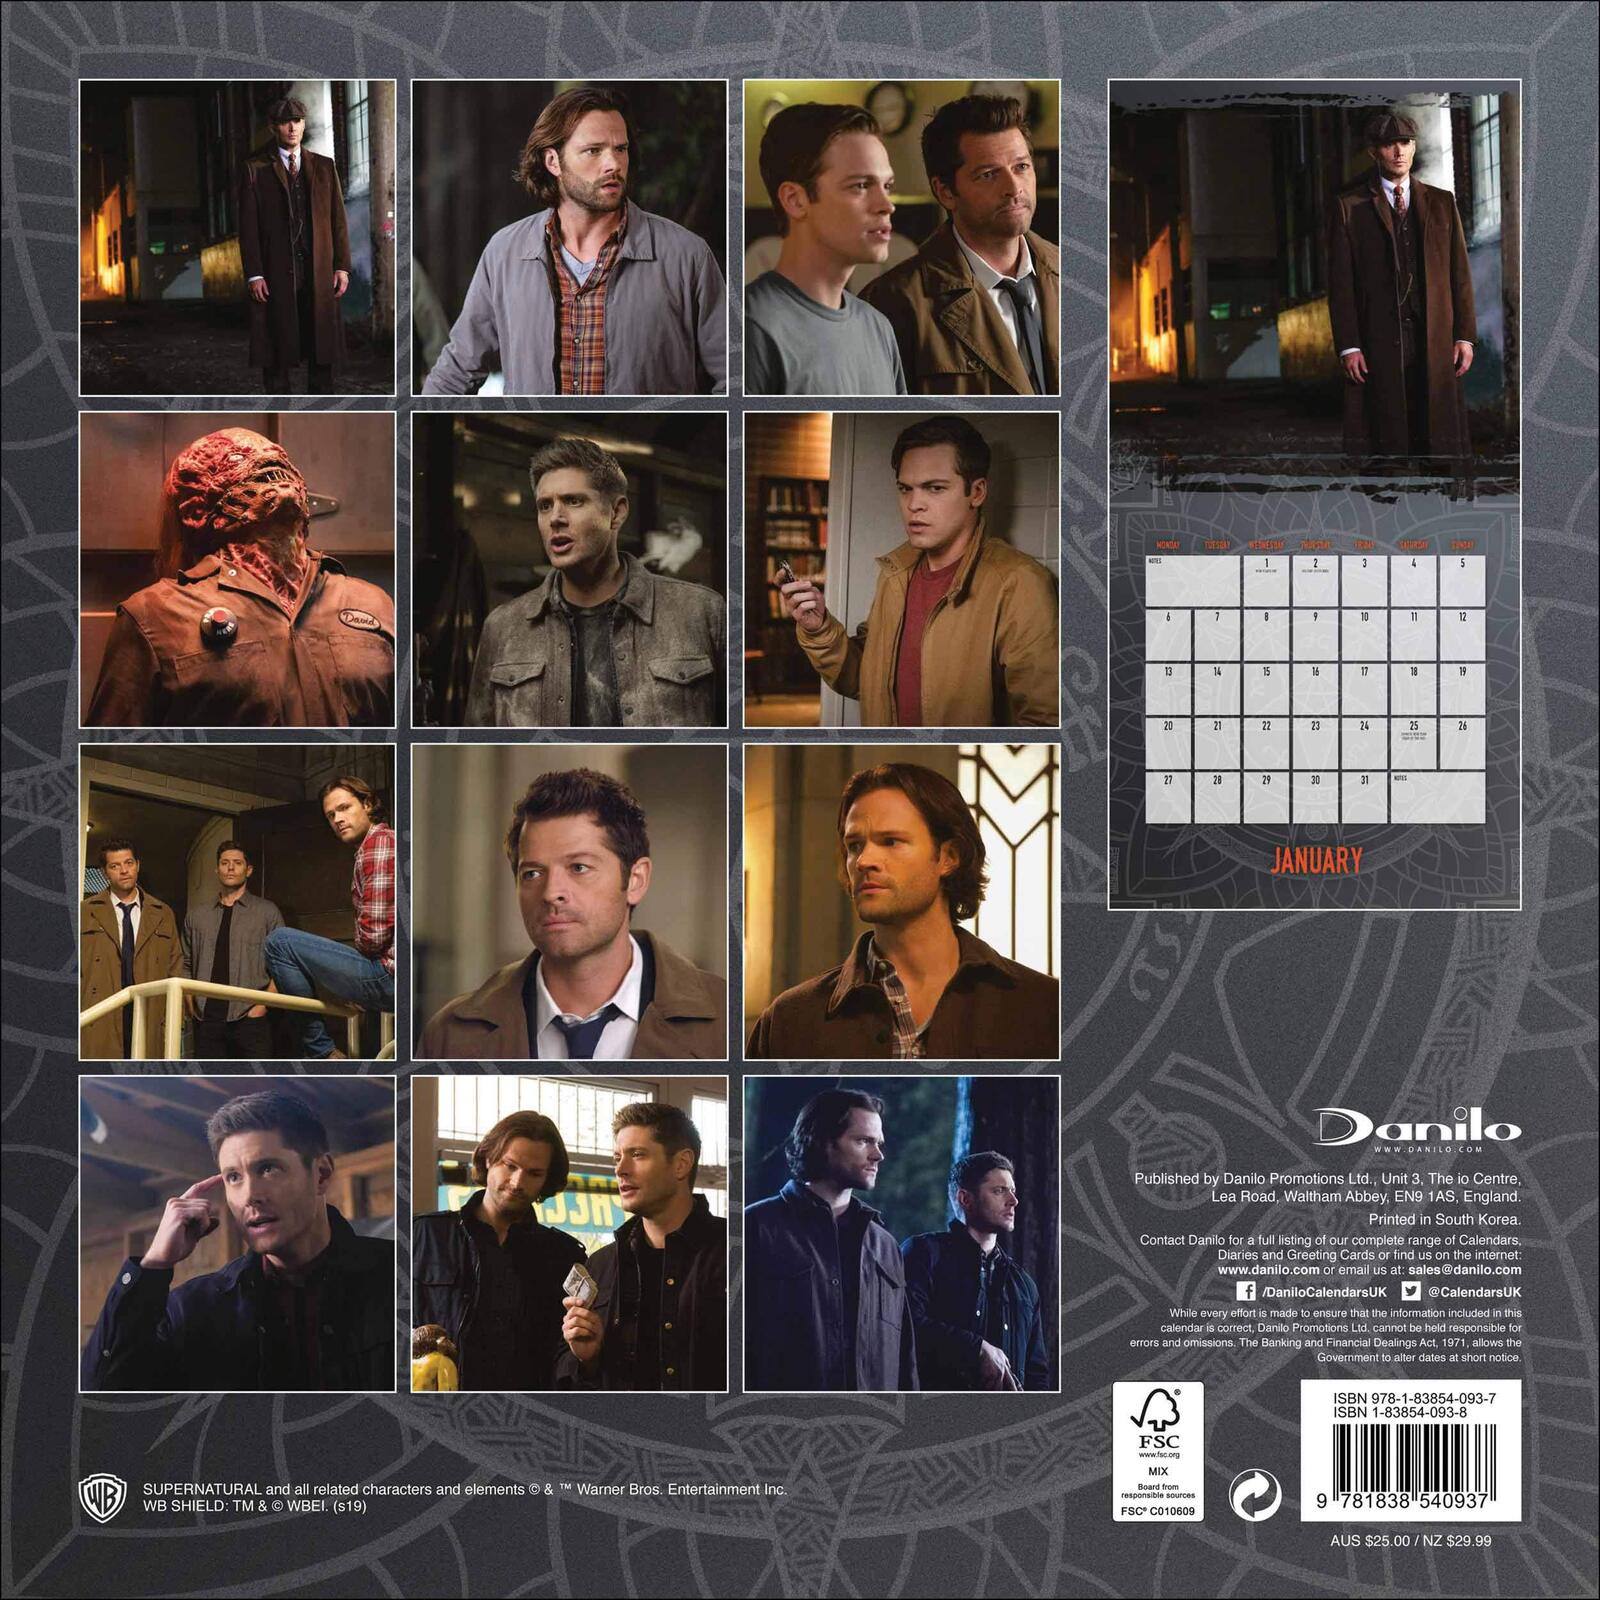 Supernatural Official 2020 Square Wall Calendar by Danilo eBay